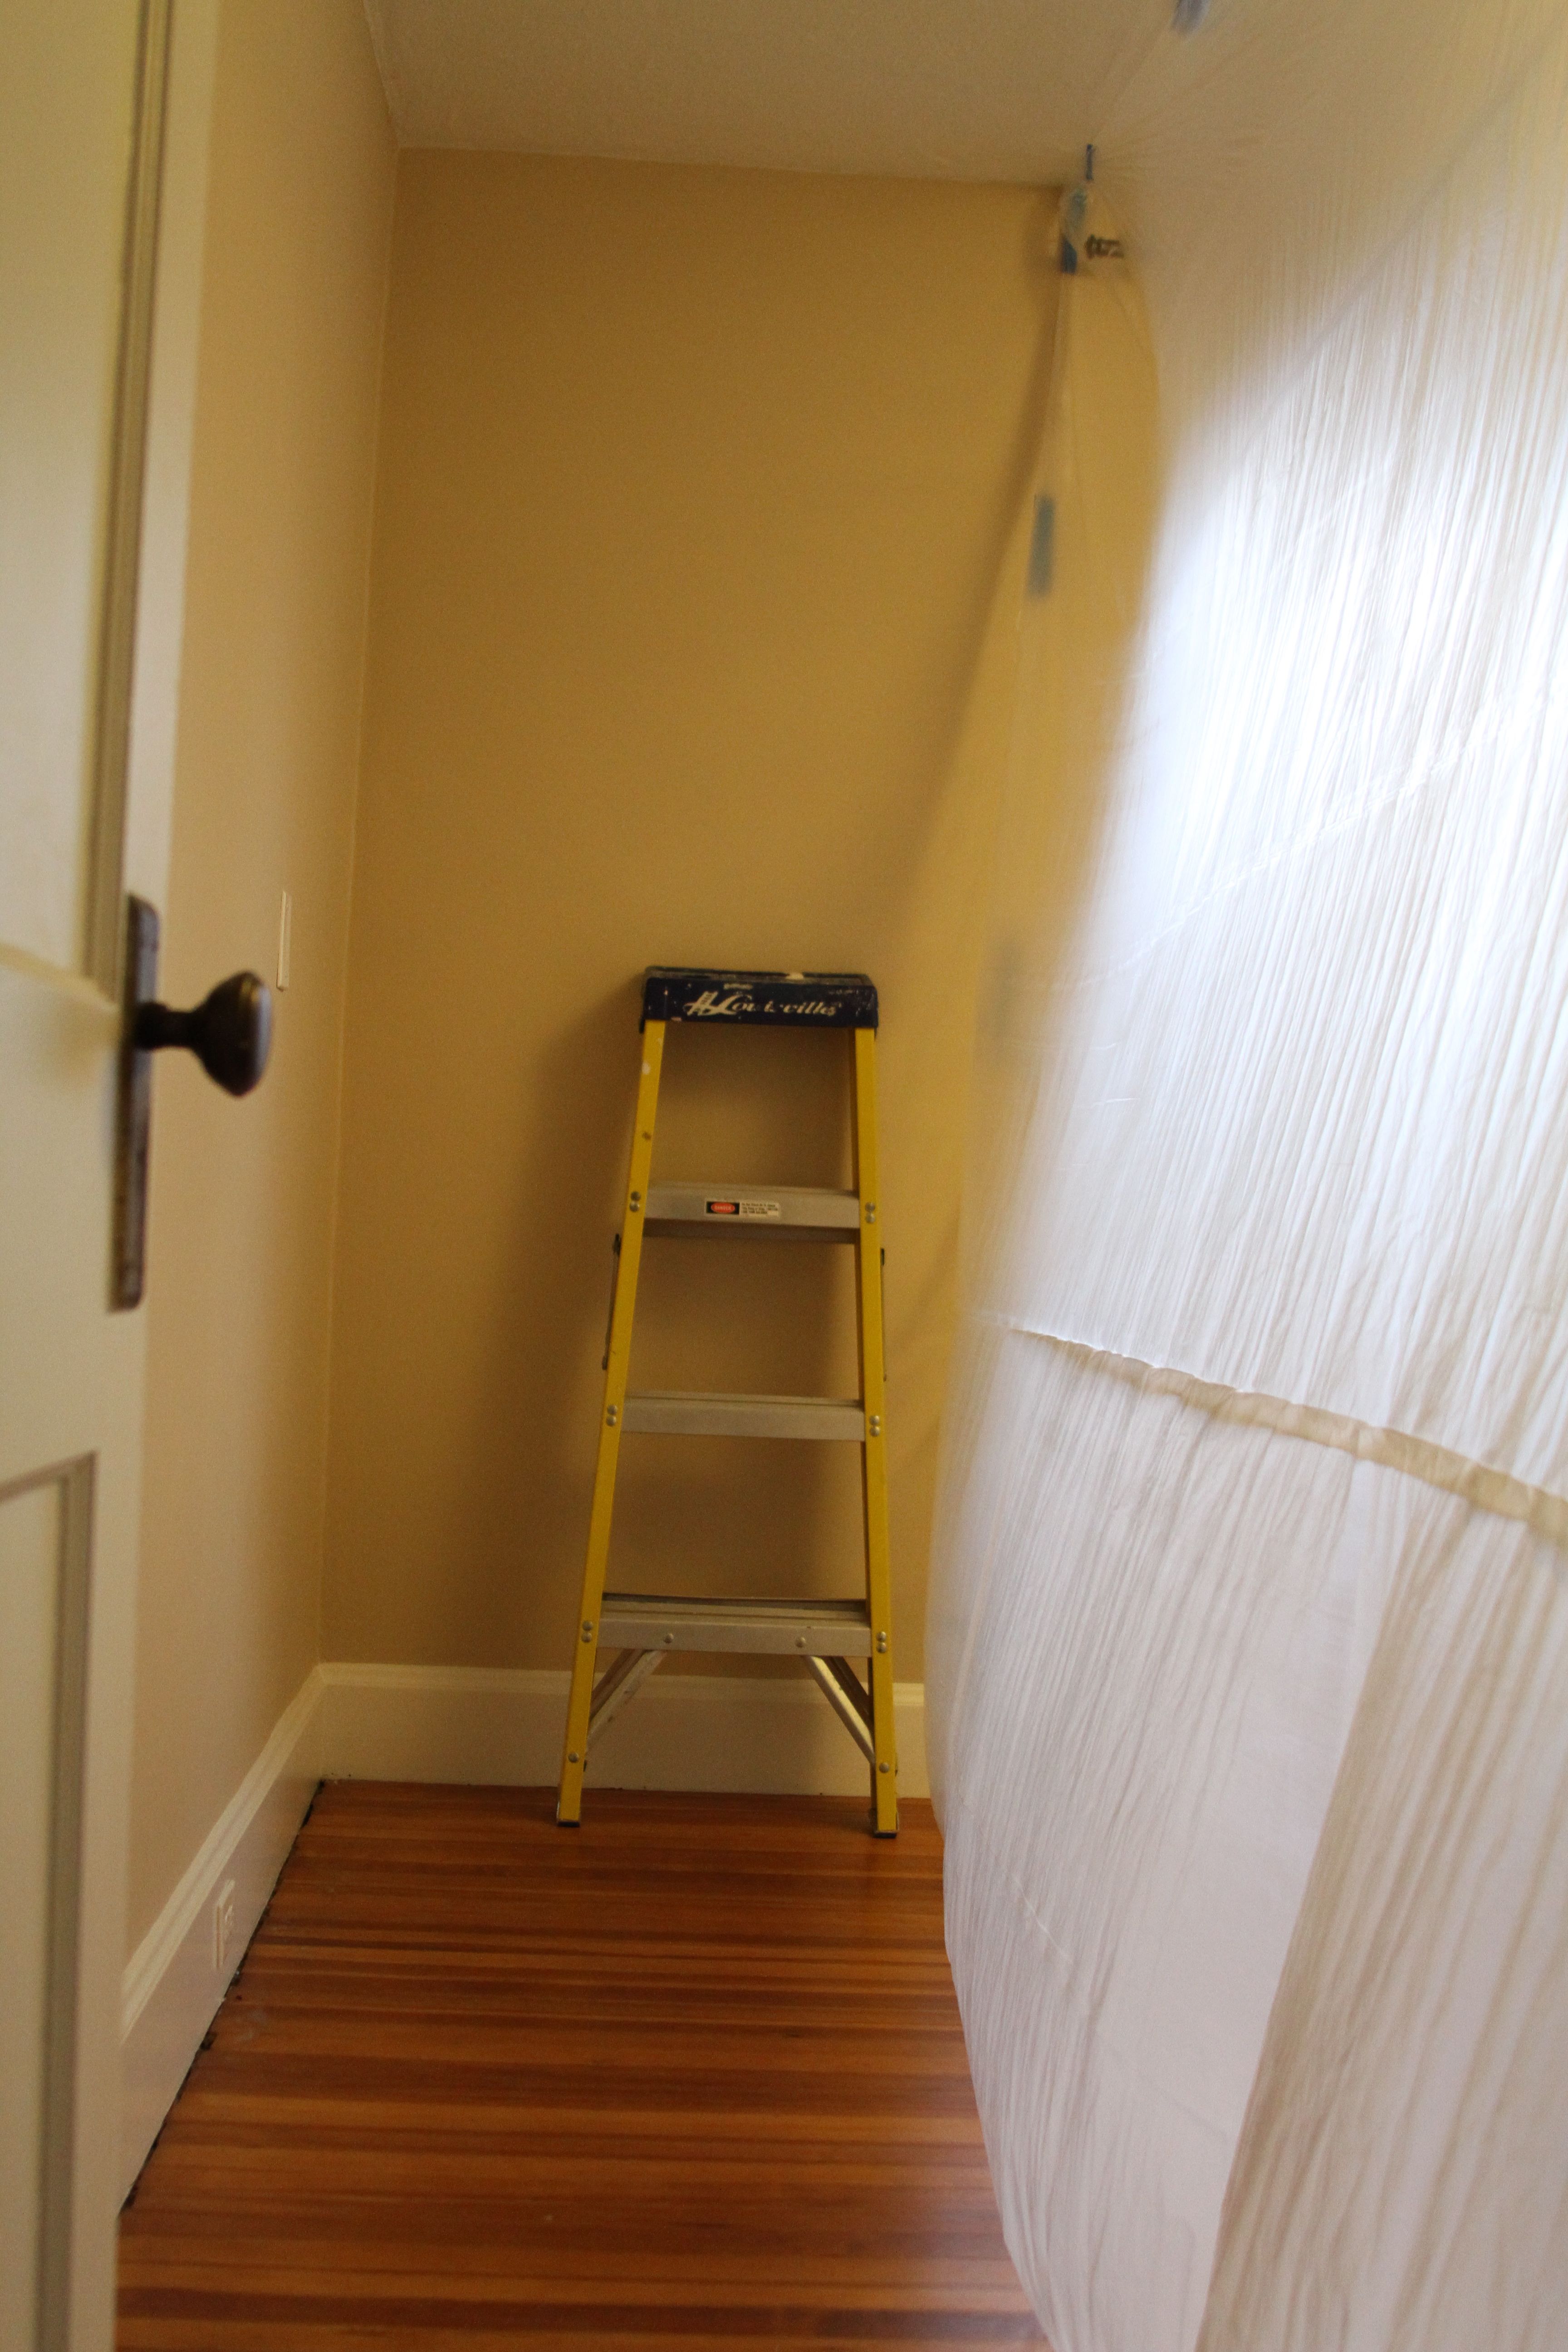 Jeff put up this painter's plastic wall to divide the rest of our bedroom from the work zone. We didn't protect the floors this time, since we knew that we'd need to sleep in this room every night. So I hovered with a broom and vacuum.